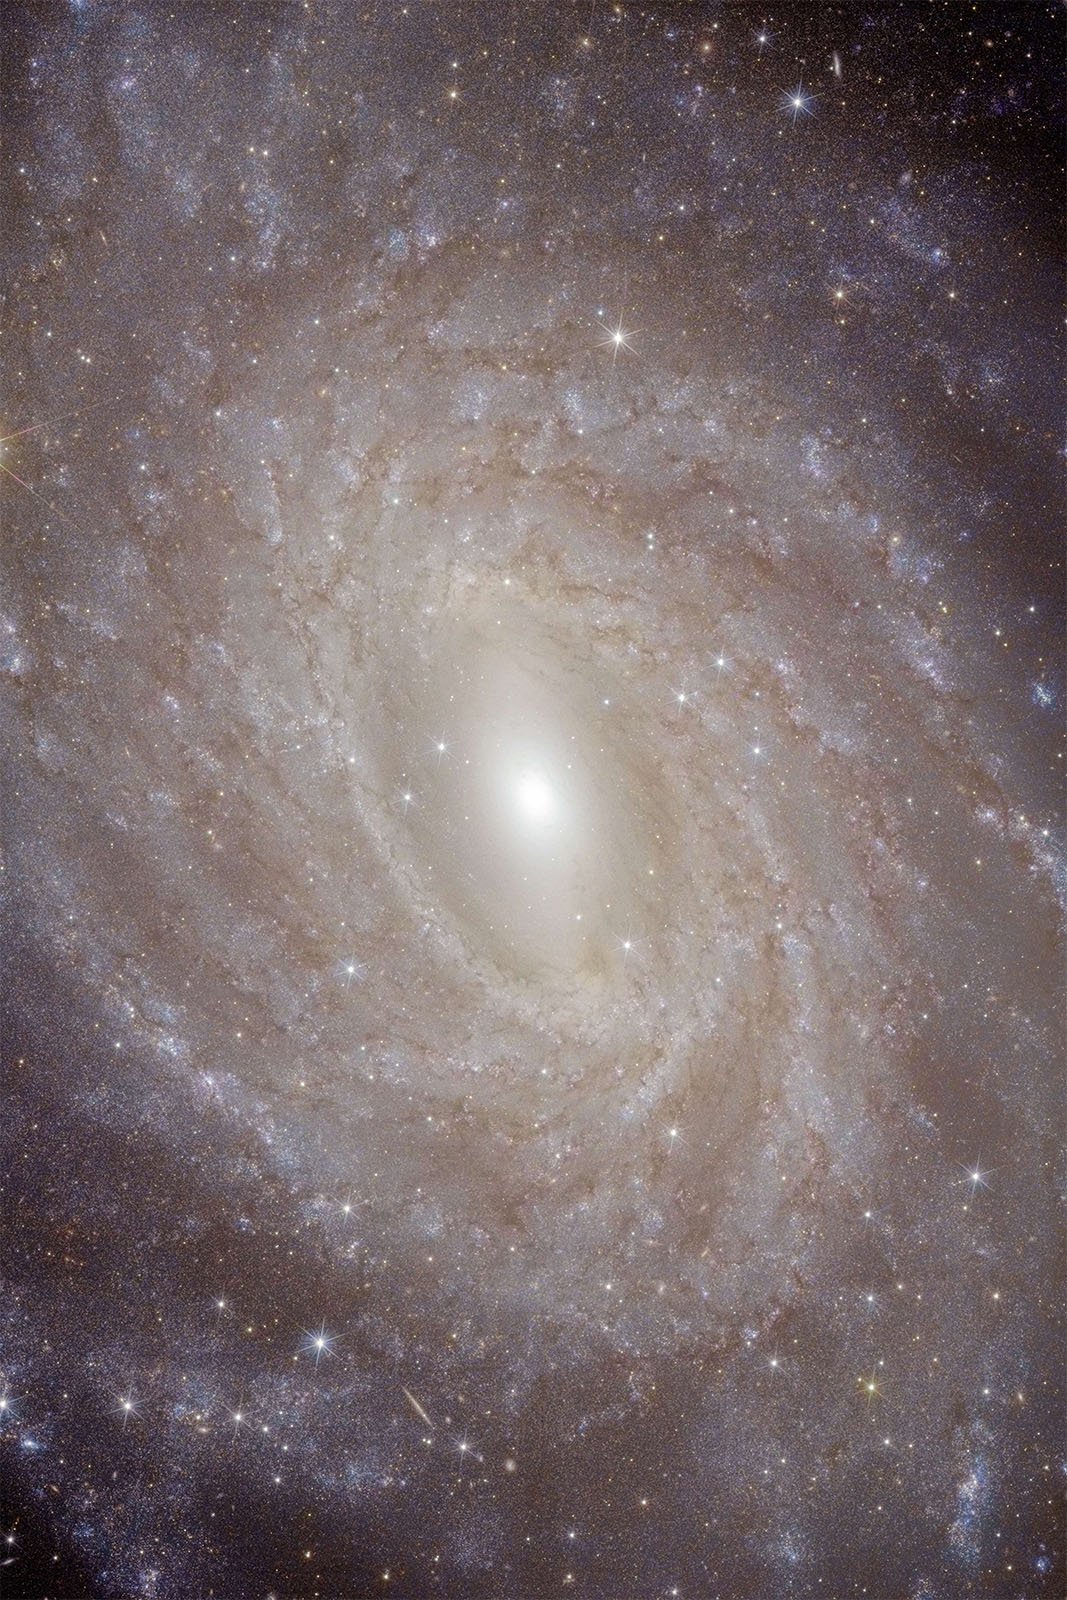 An image of a sprawling spiral galaxy, showcasing numerous bright stars and a glowing core at its center. The galaxy's spiral arms are studded with dense star clusters and dust, all set against a backdrop of deep space, dotted with more distant stars and galaxies.